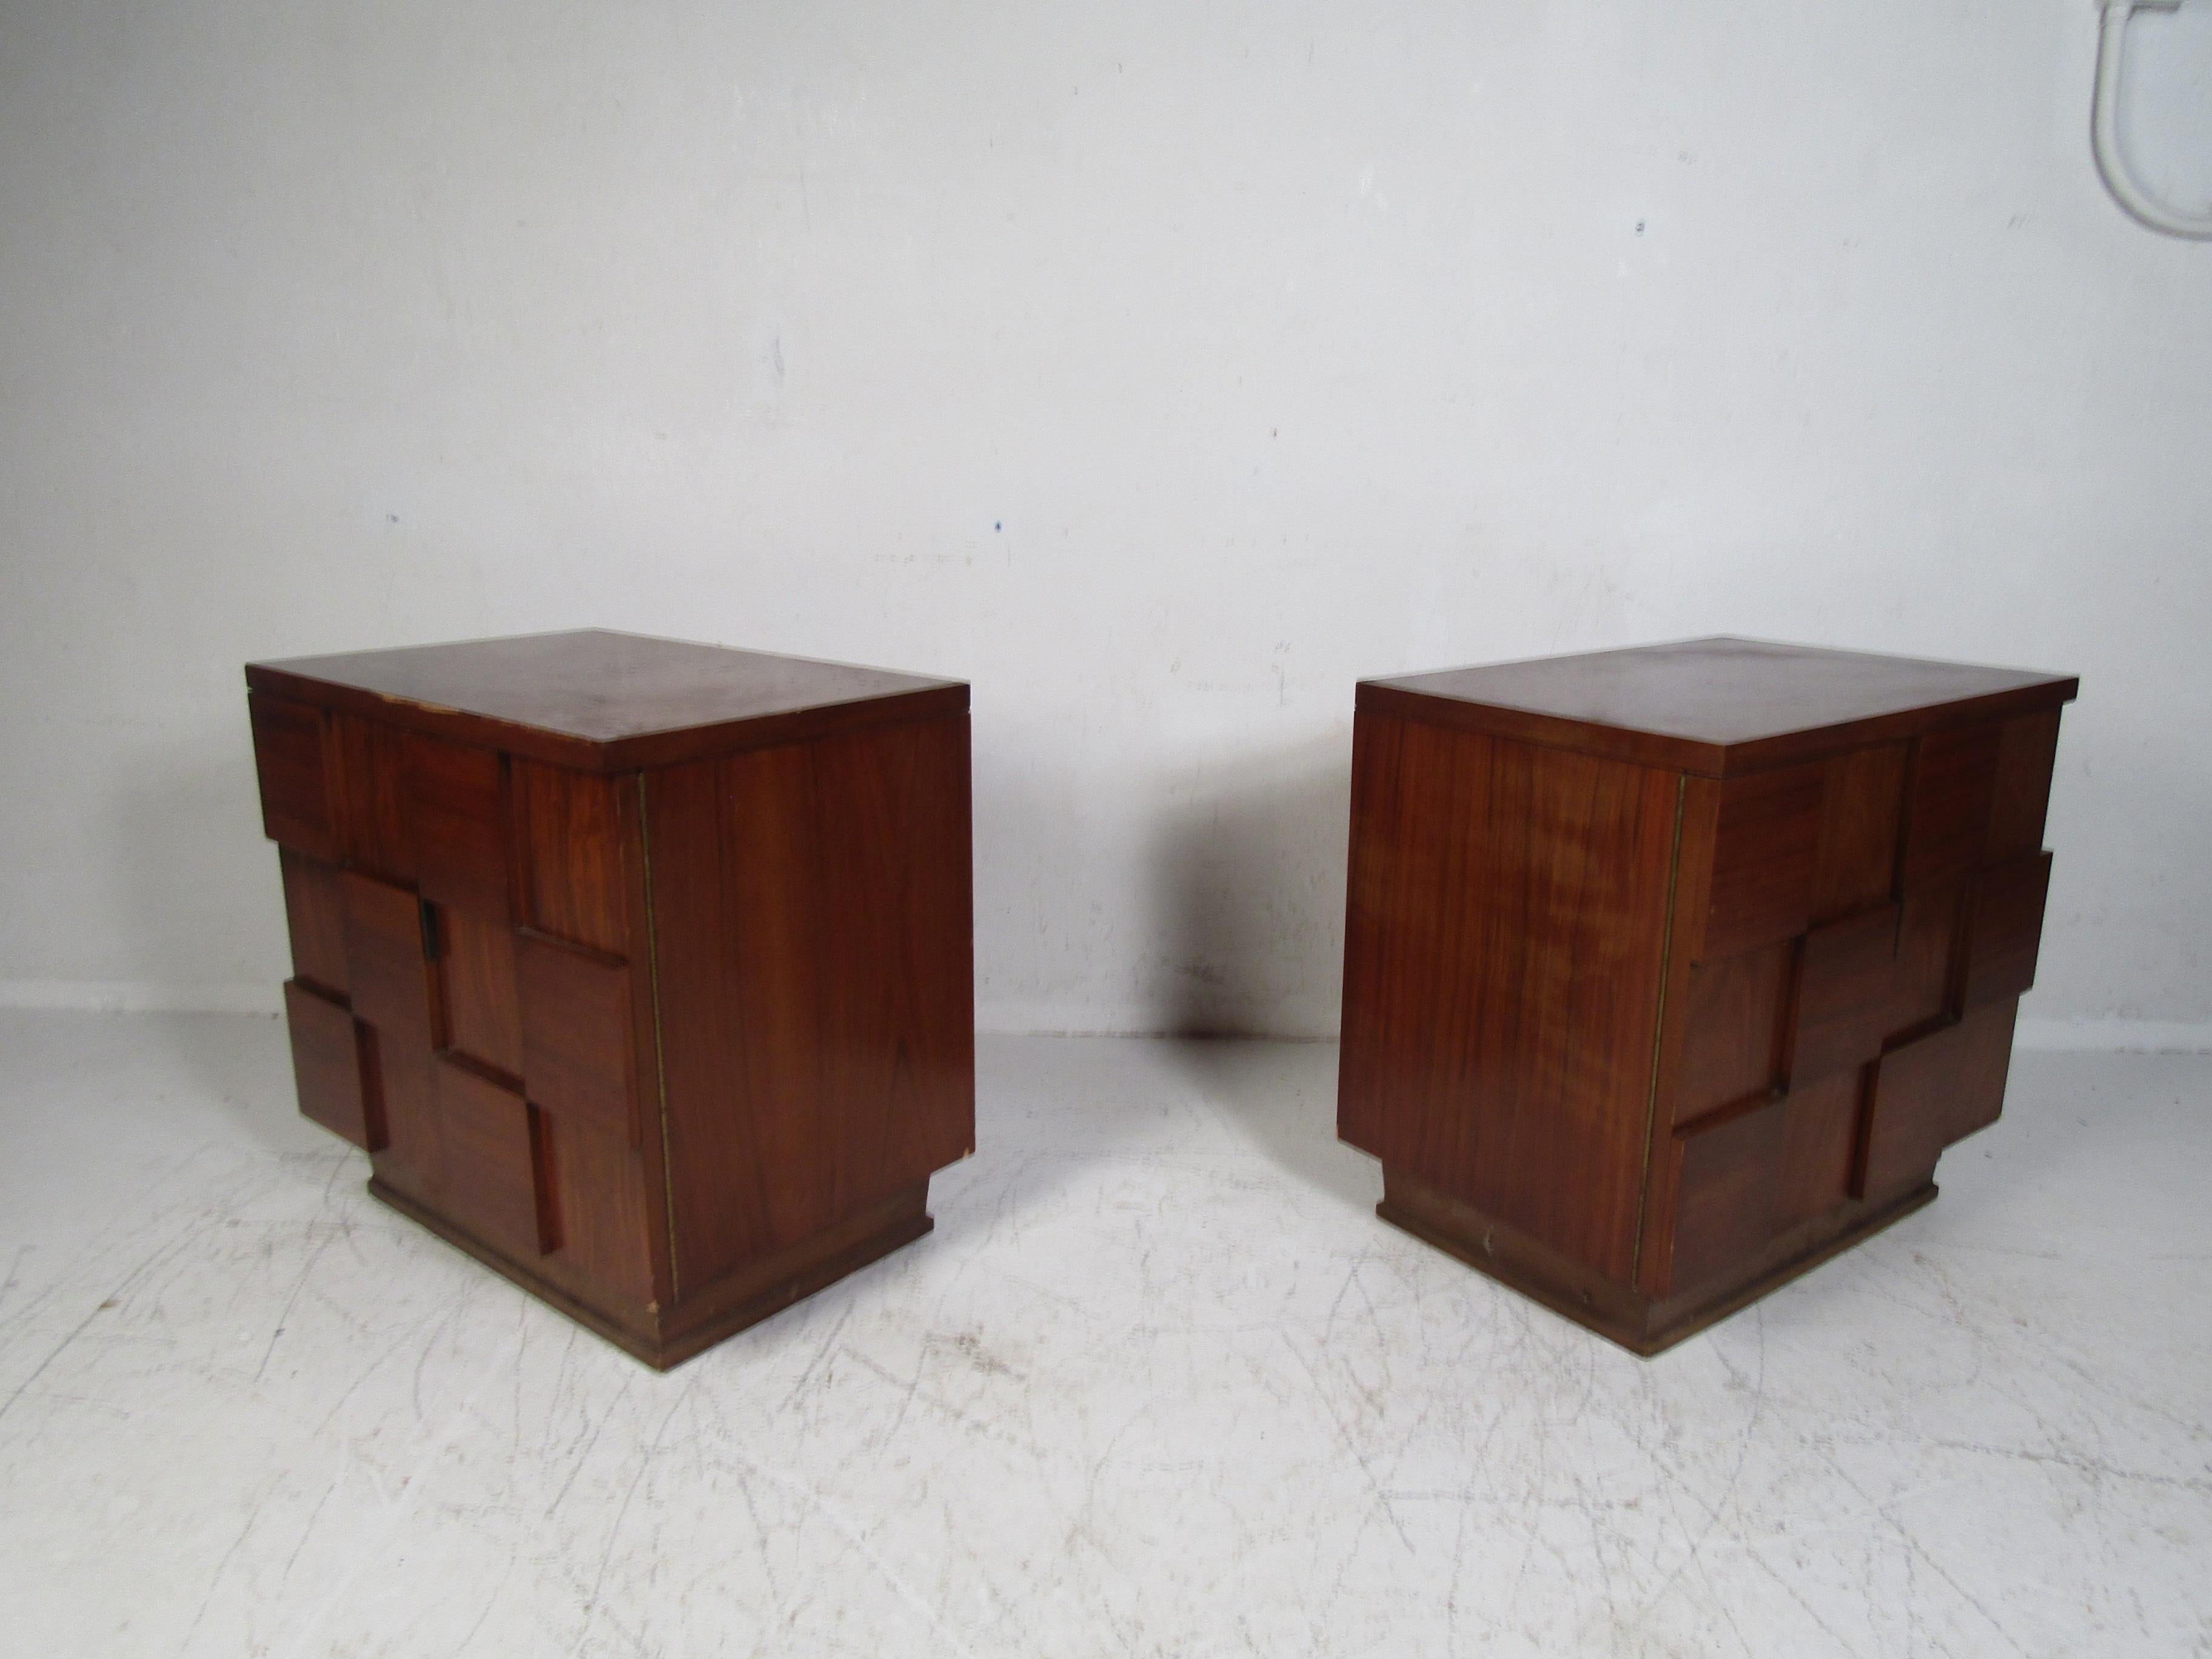 Stylish pair of midcentury nightstands with a patchwork/Brutalist style accent on the cabinet doors. Made by Young Manufacturing Company. Nice pair that is sure to complement any modern interior. Please confirm item location with dealer (NJ or NY).